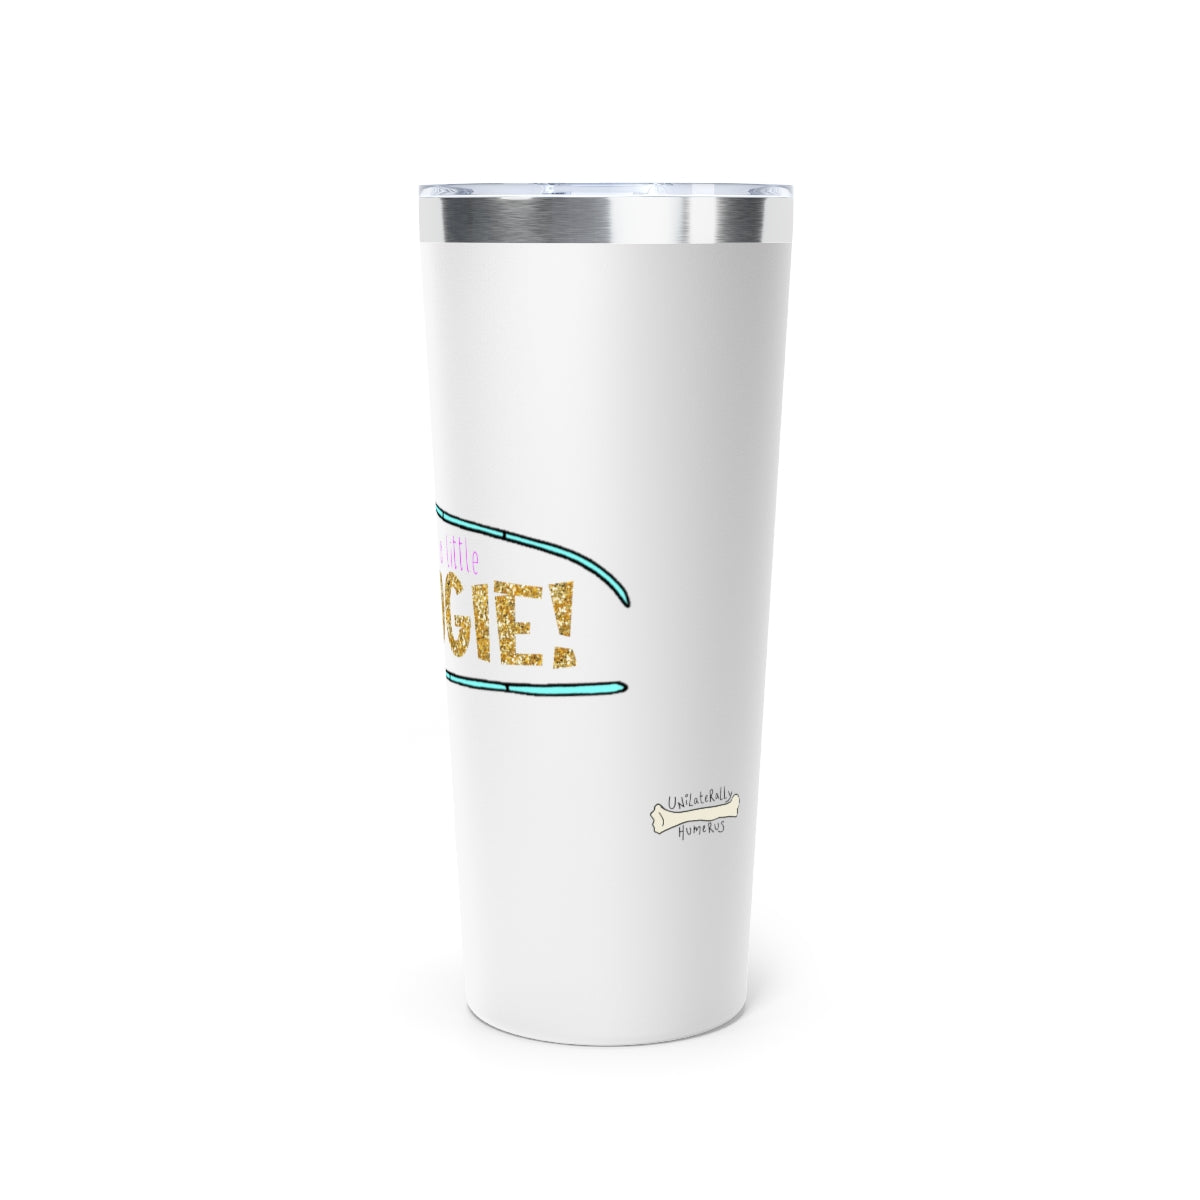 That's a Little Bougie! Copper Vacuum Insulated Tumbler, 22oz